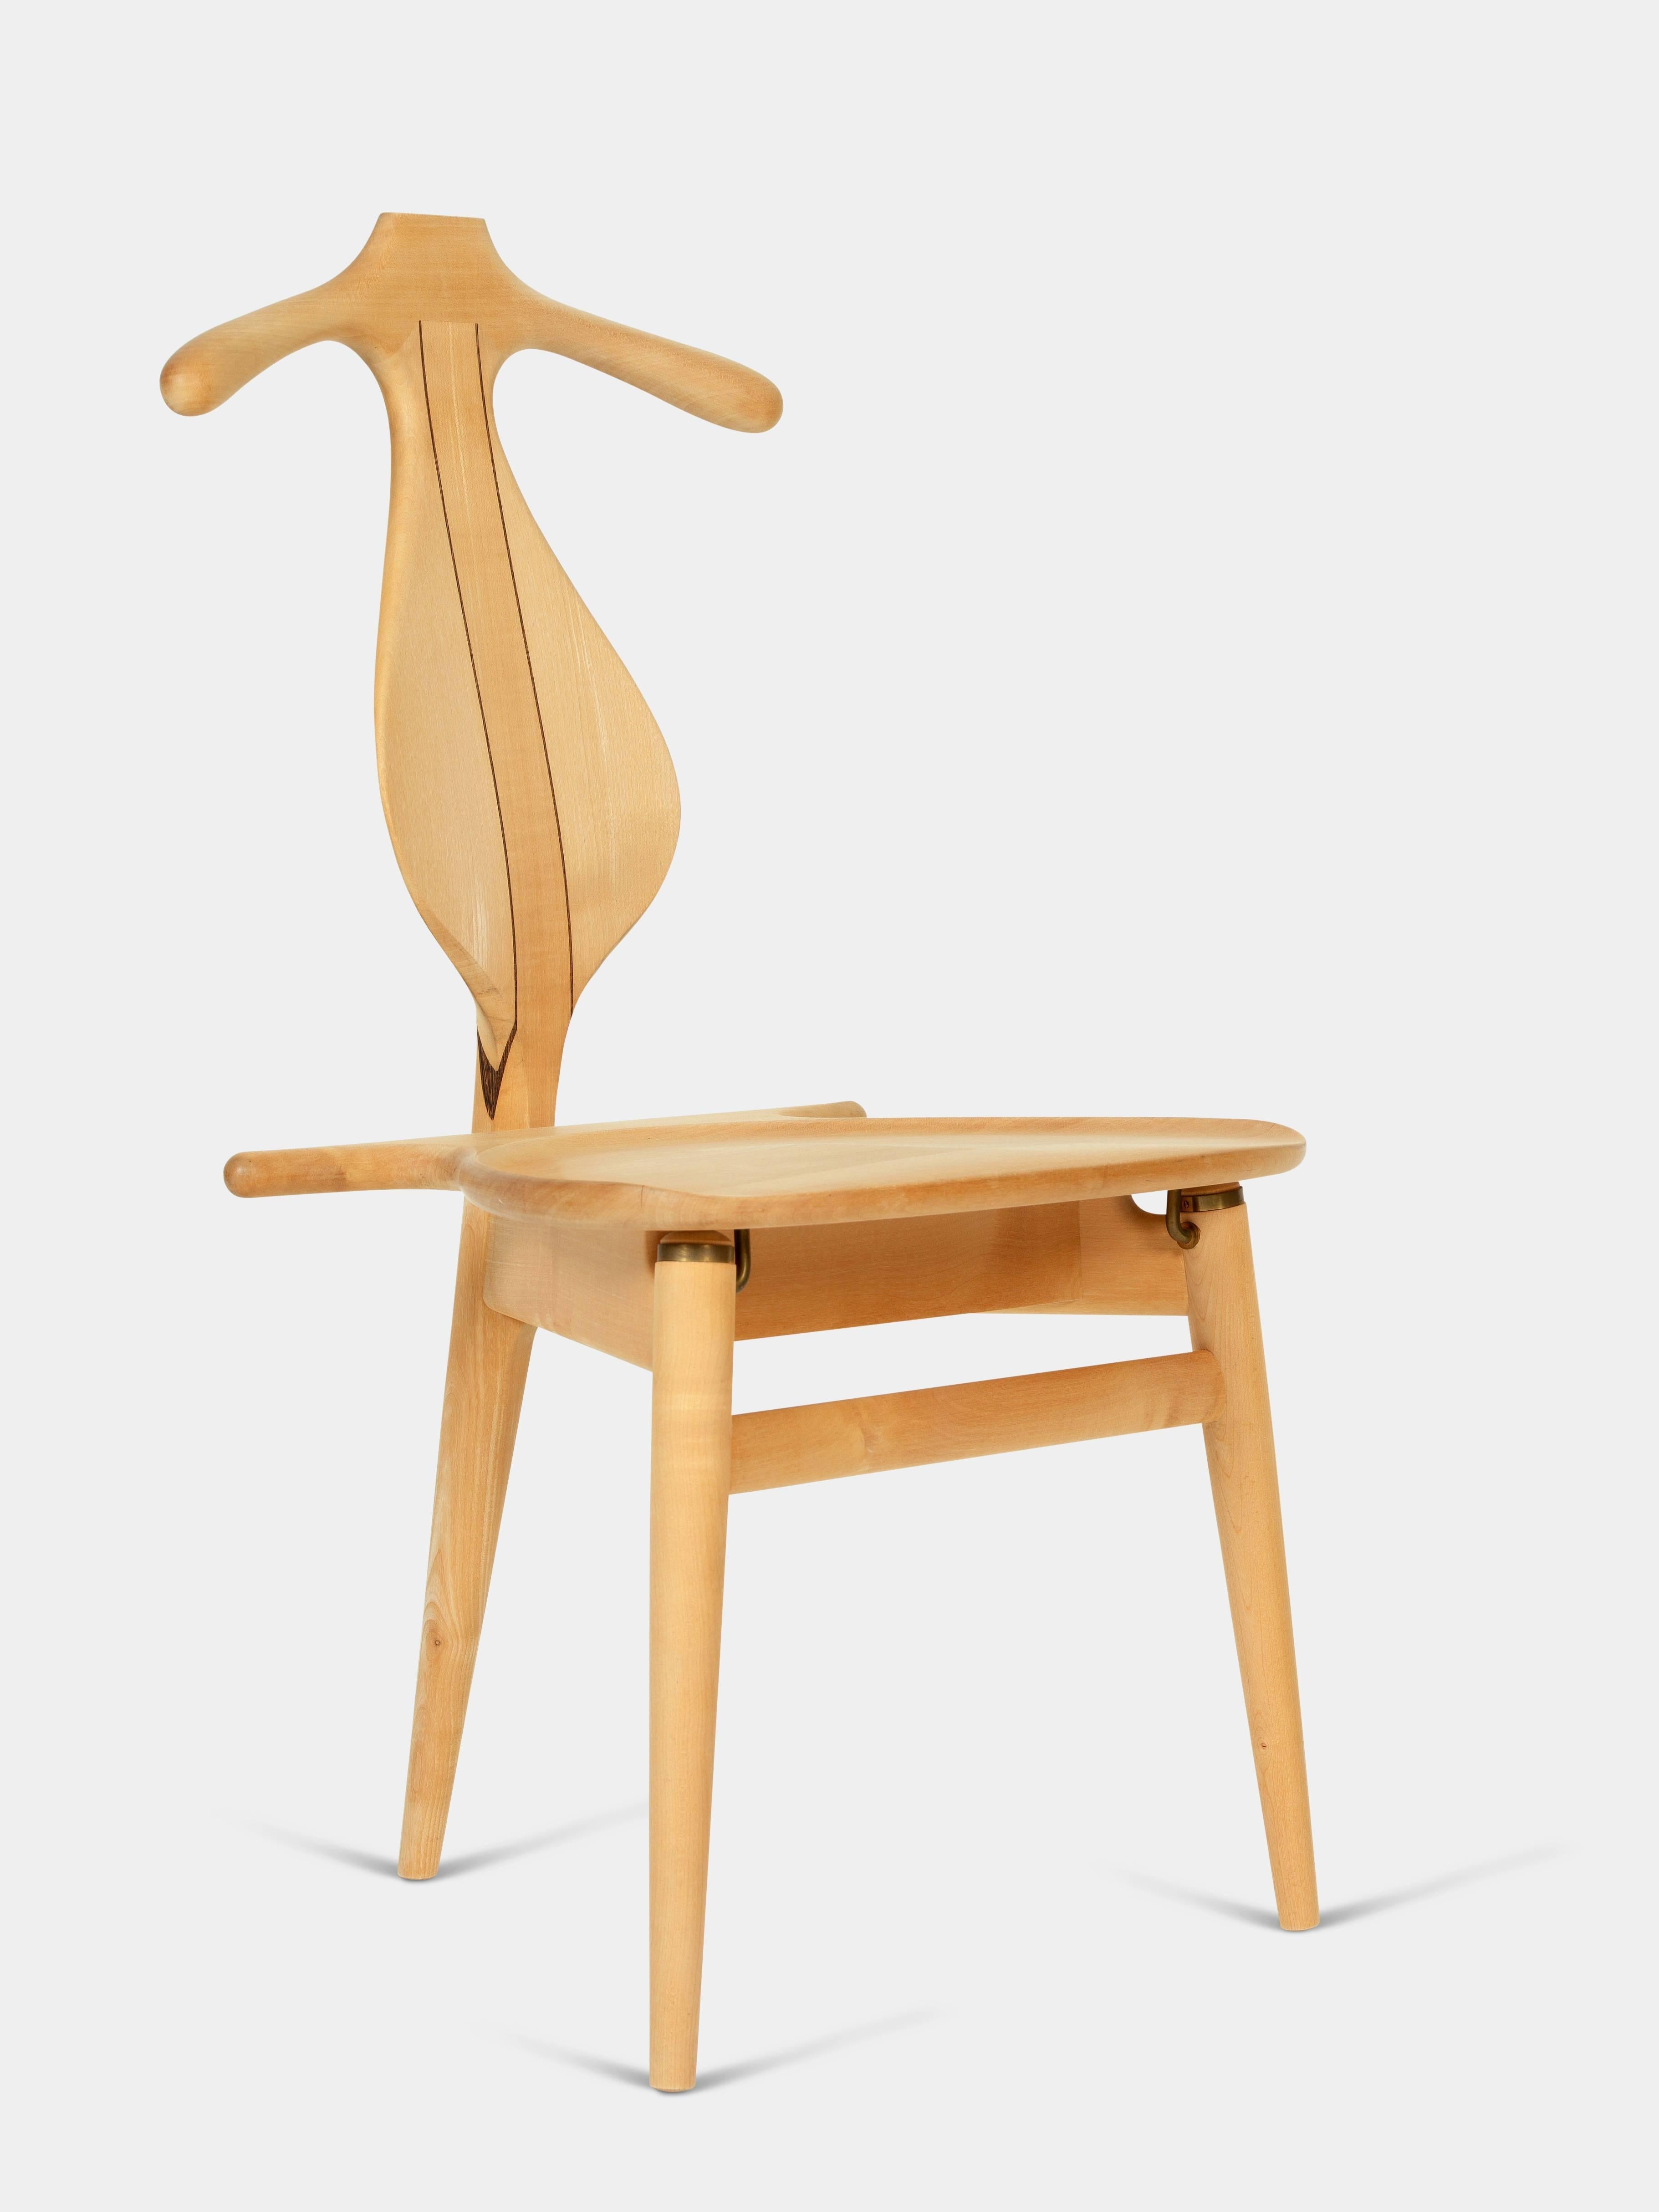 Valet chair / model PP-250

Chair of ash and wengé. Back shaped like hanger and liftable seat with storage underneath. 
Designed in 1953, manufactured by PP Møbler since 1982.